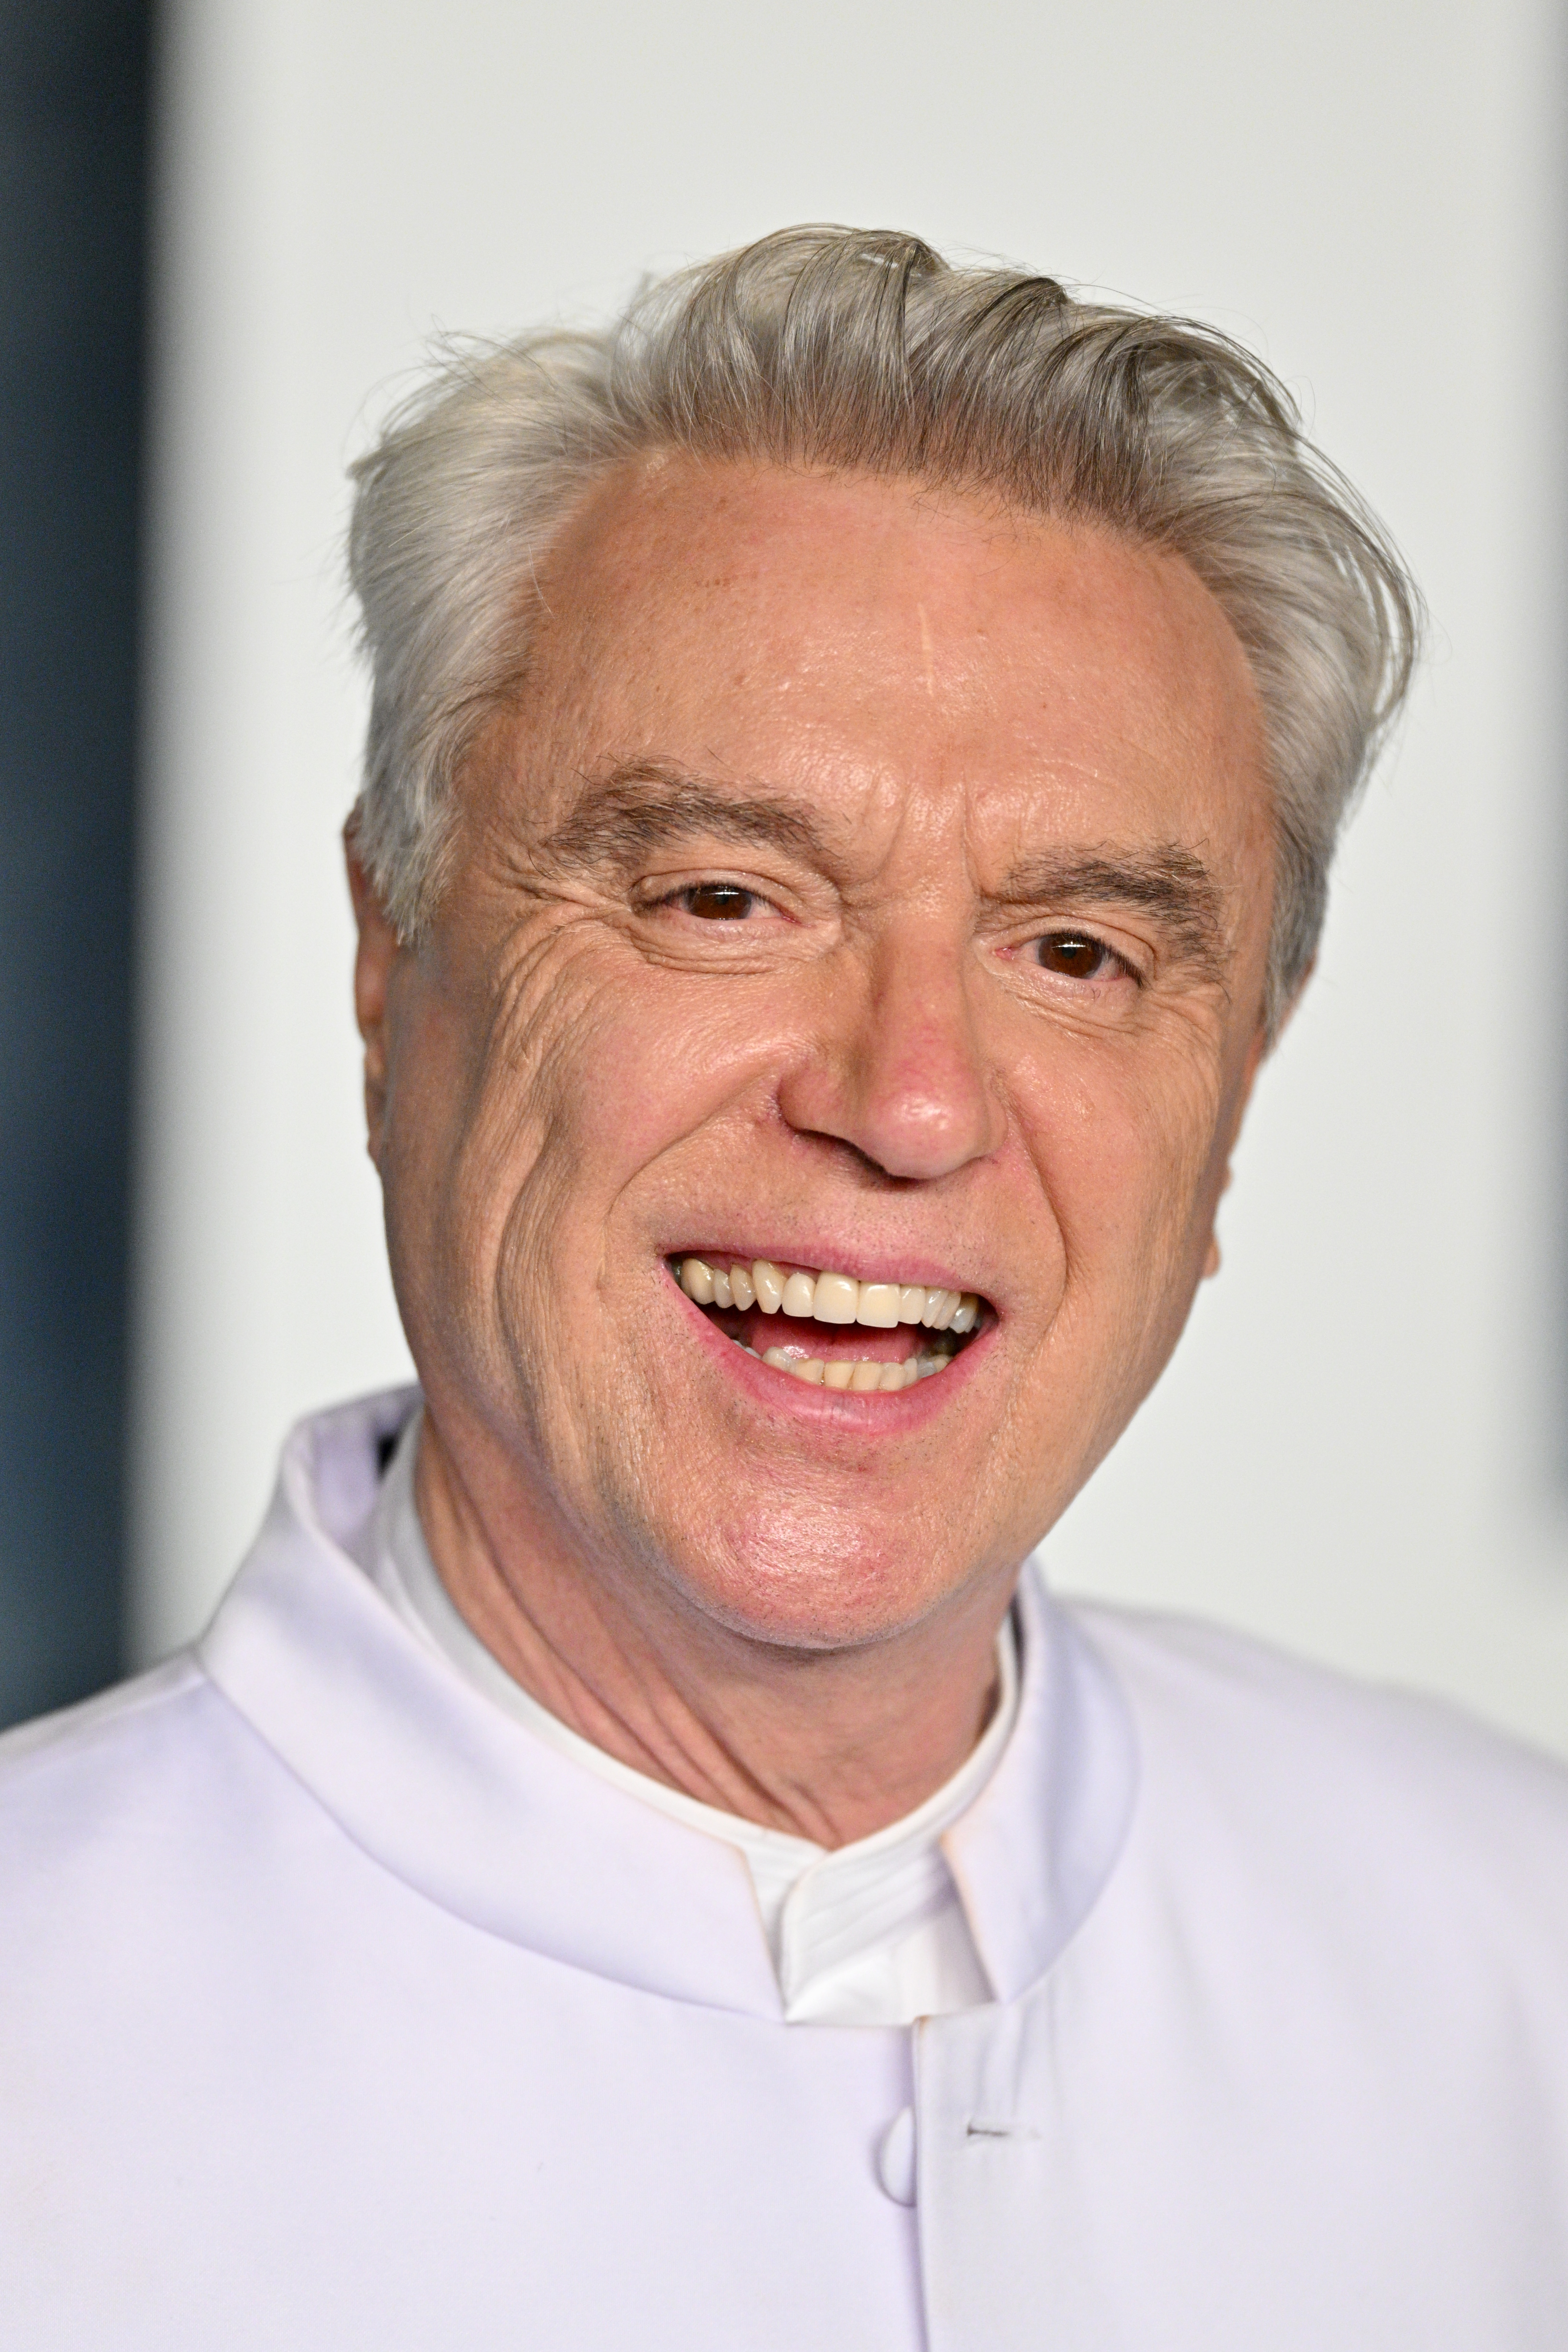 David Byrne during the 2023 Vanity Fair Oscar Party at Wallis Annenberg Center for the Performing Arts on March 12, 2023, in Beverly Hills, California. | Source: Getty Images